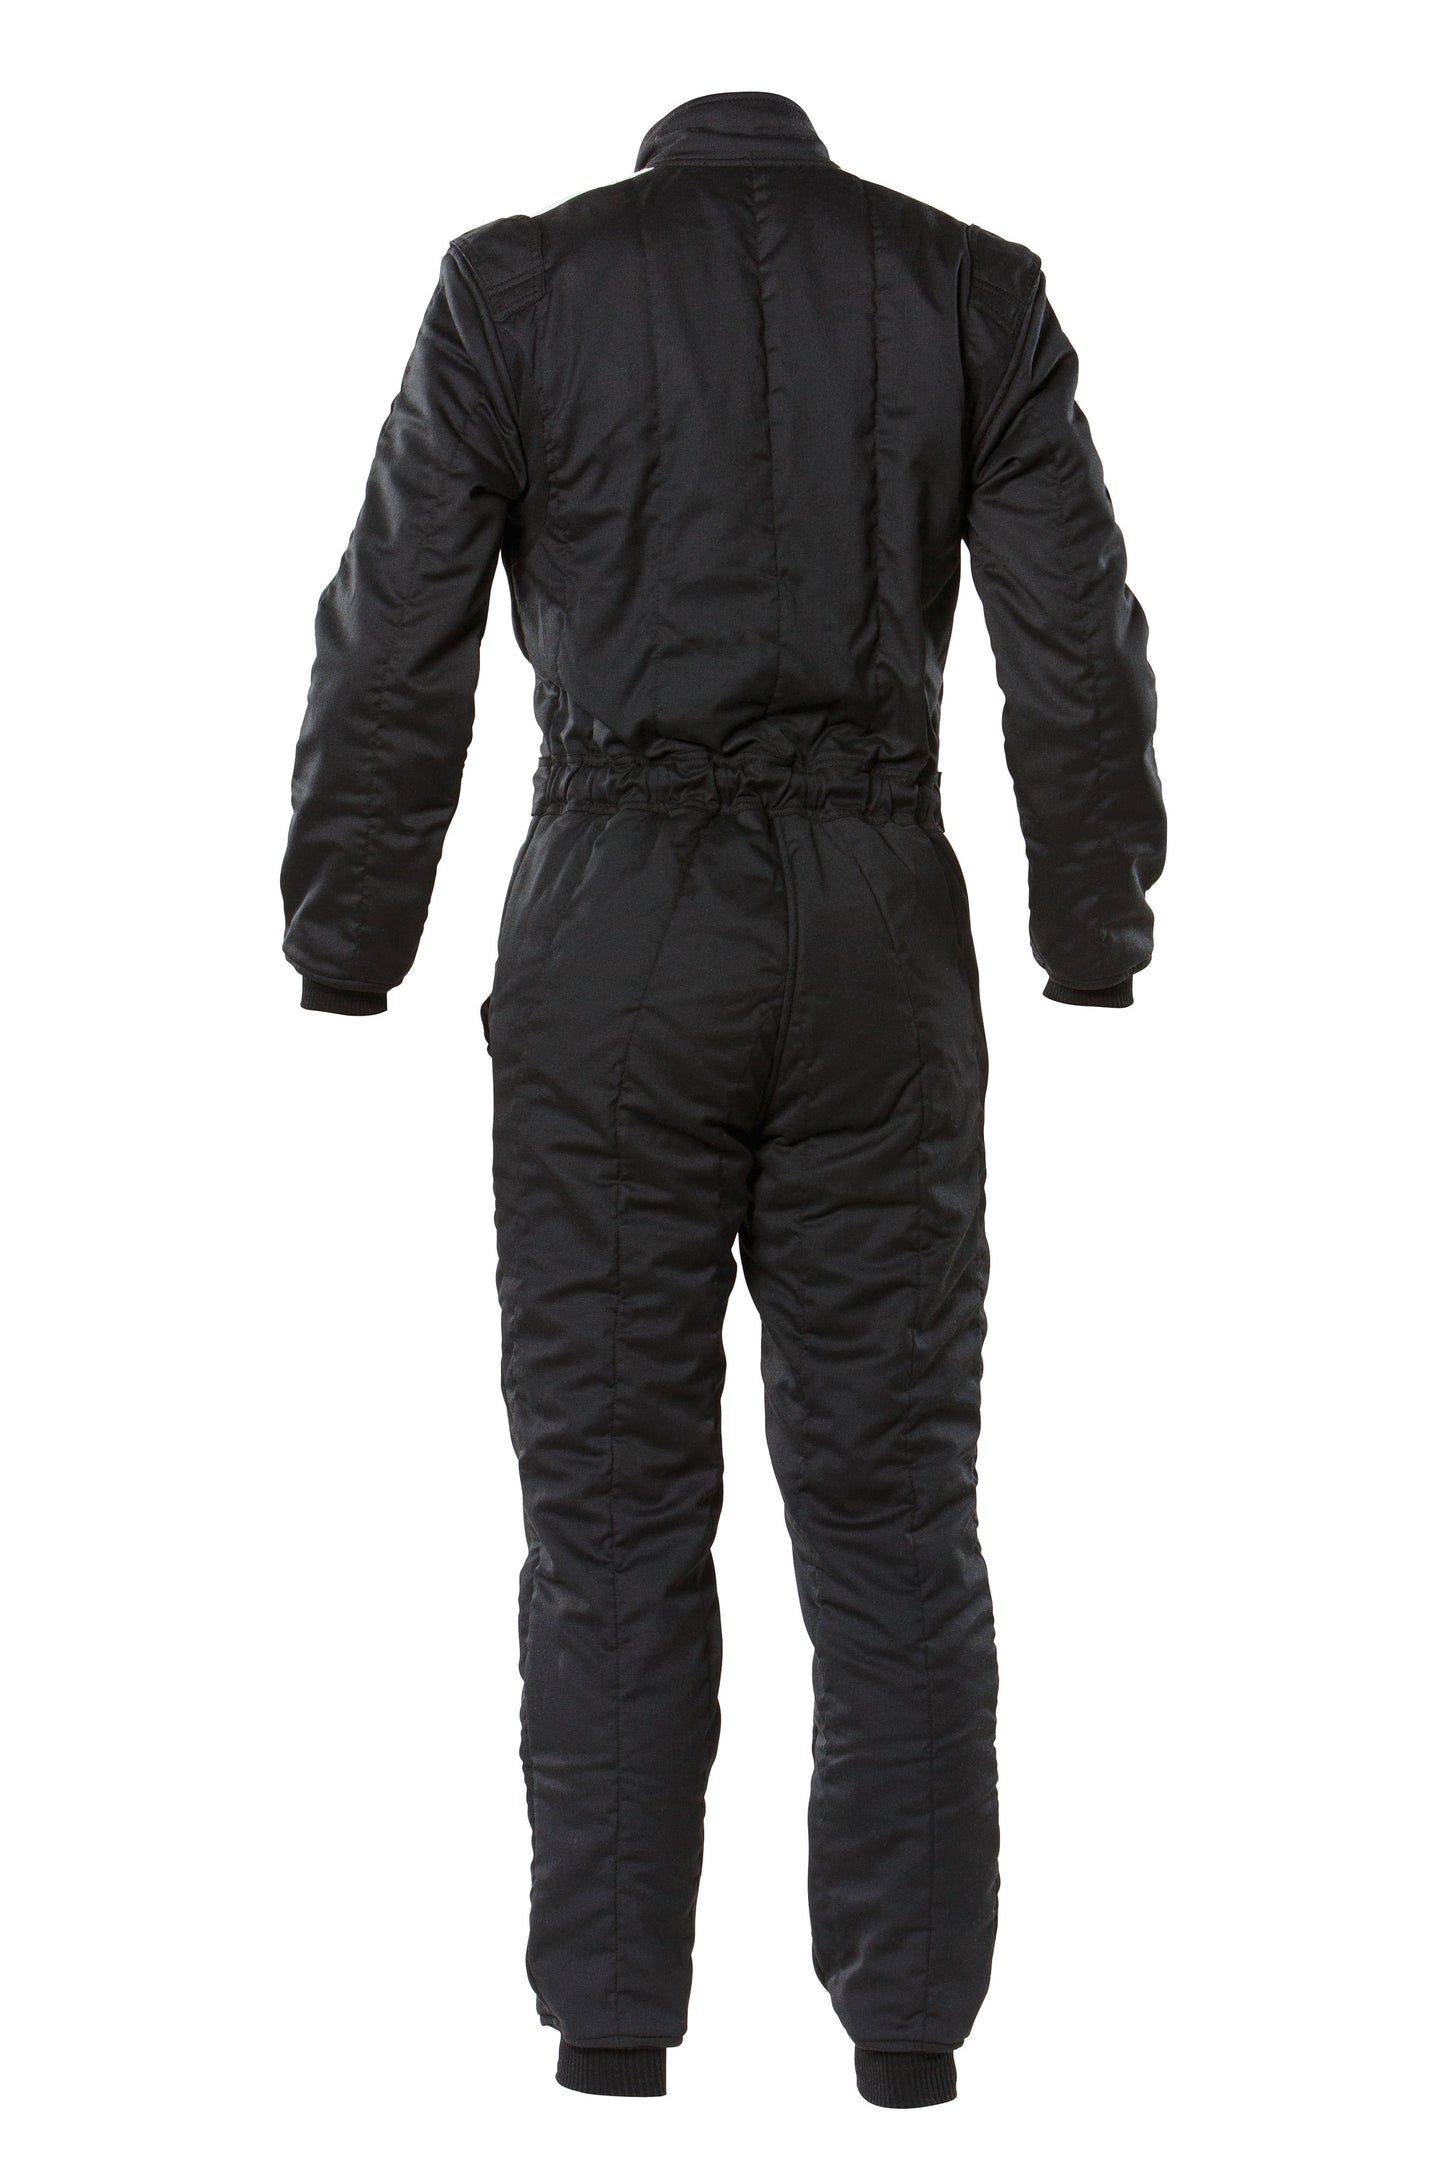 OMP Sport Race Suit Karting Entry Level Overalls Nomex Fireproof FIA Approved